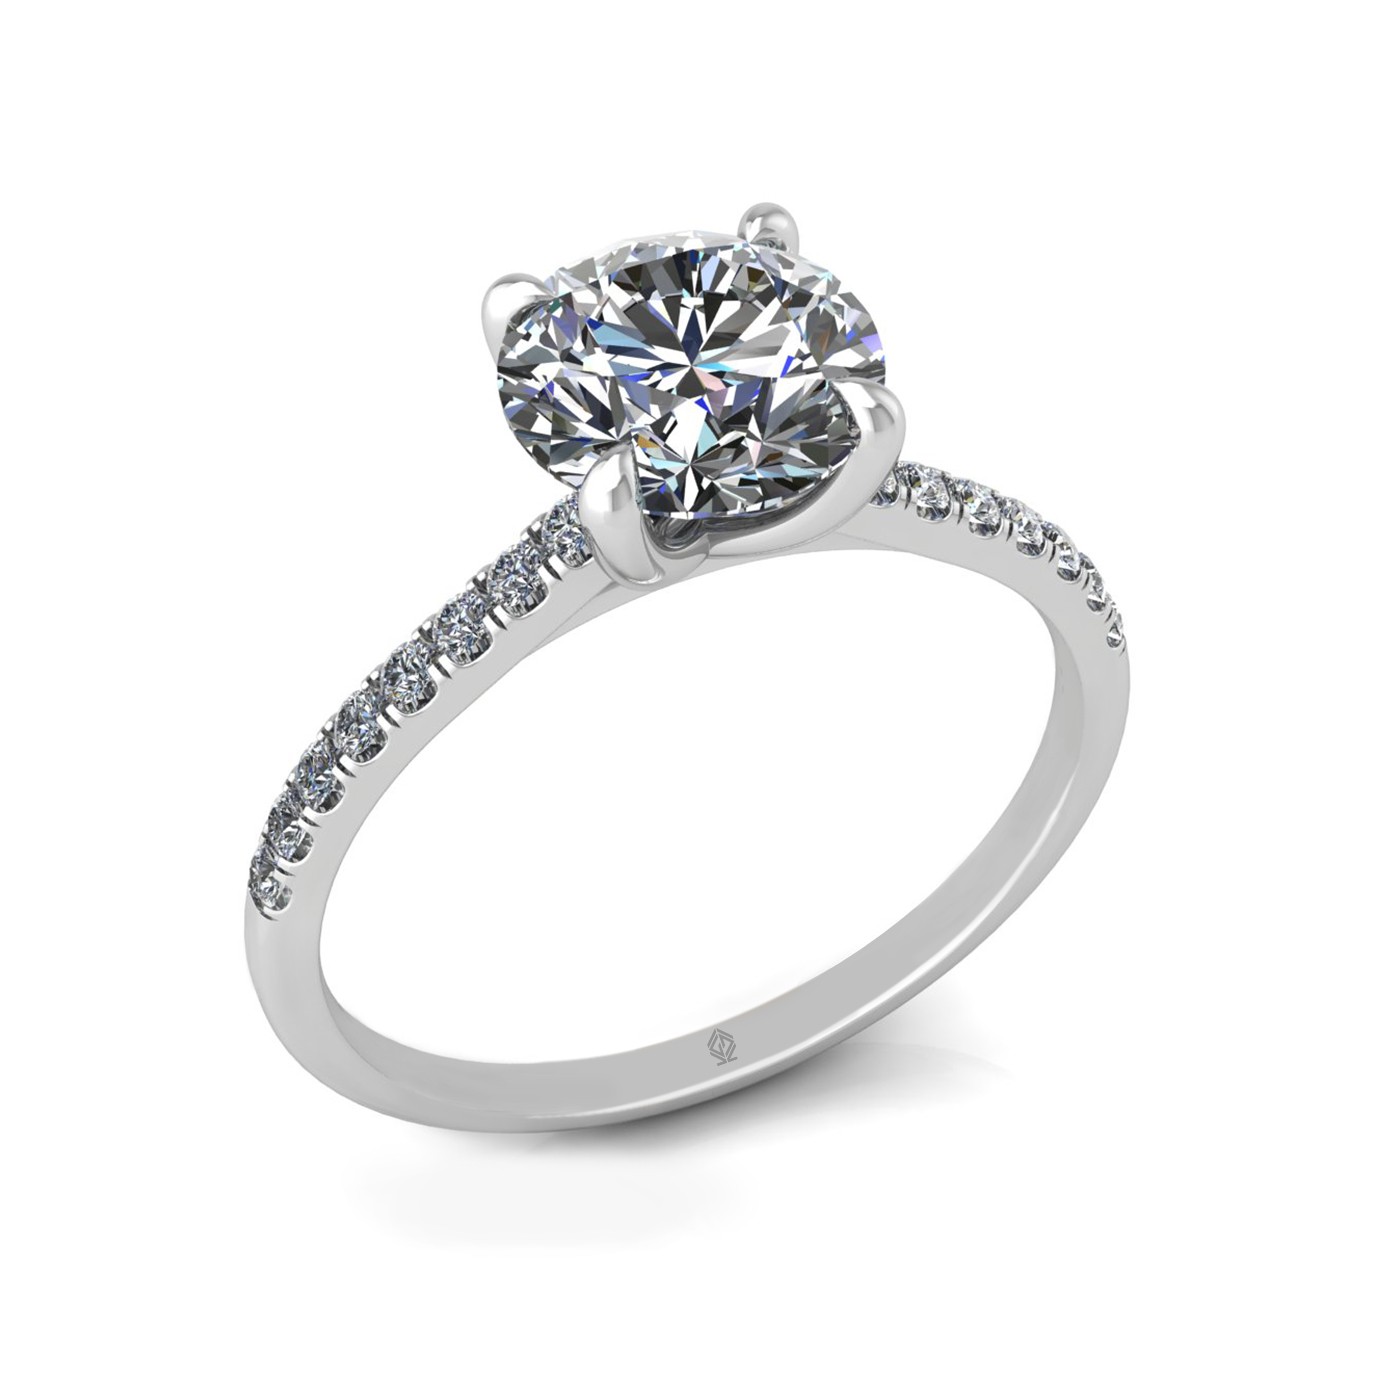 18k white gold 1.5ct 4 prongs round cut diamond engagement ring with whisper thin pavÉ set band